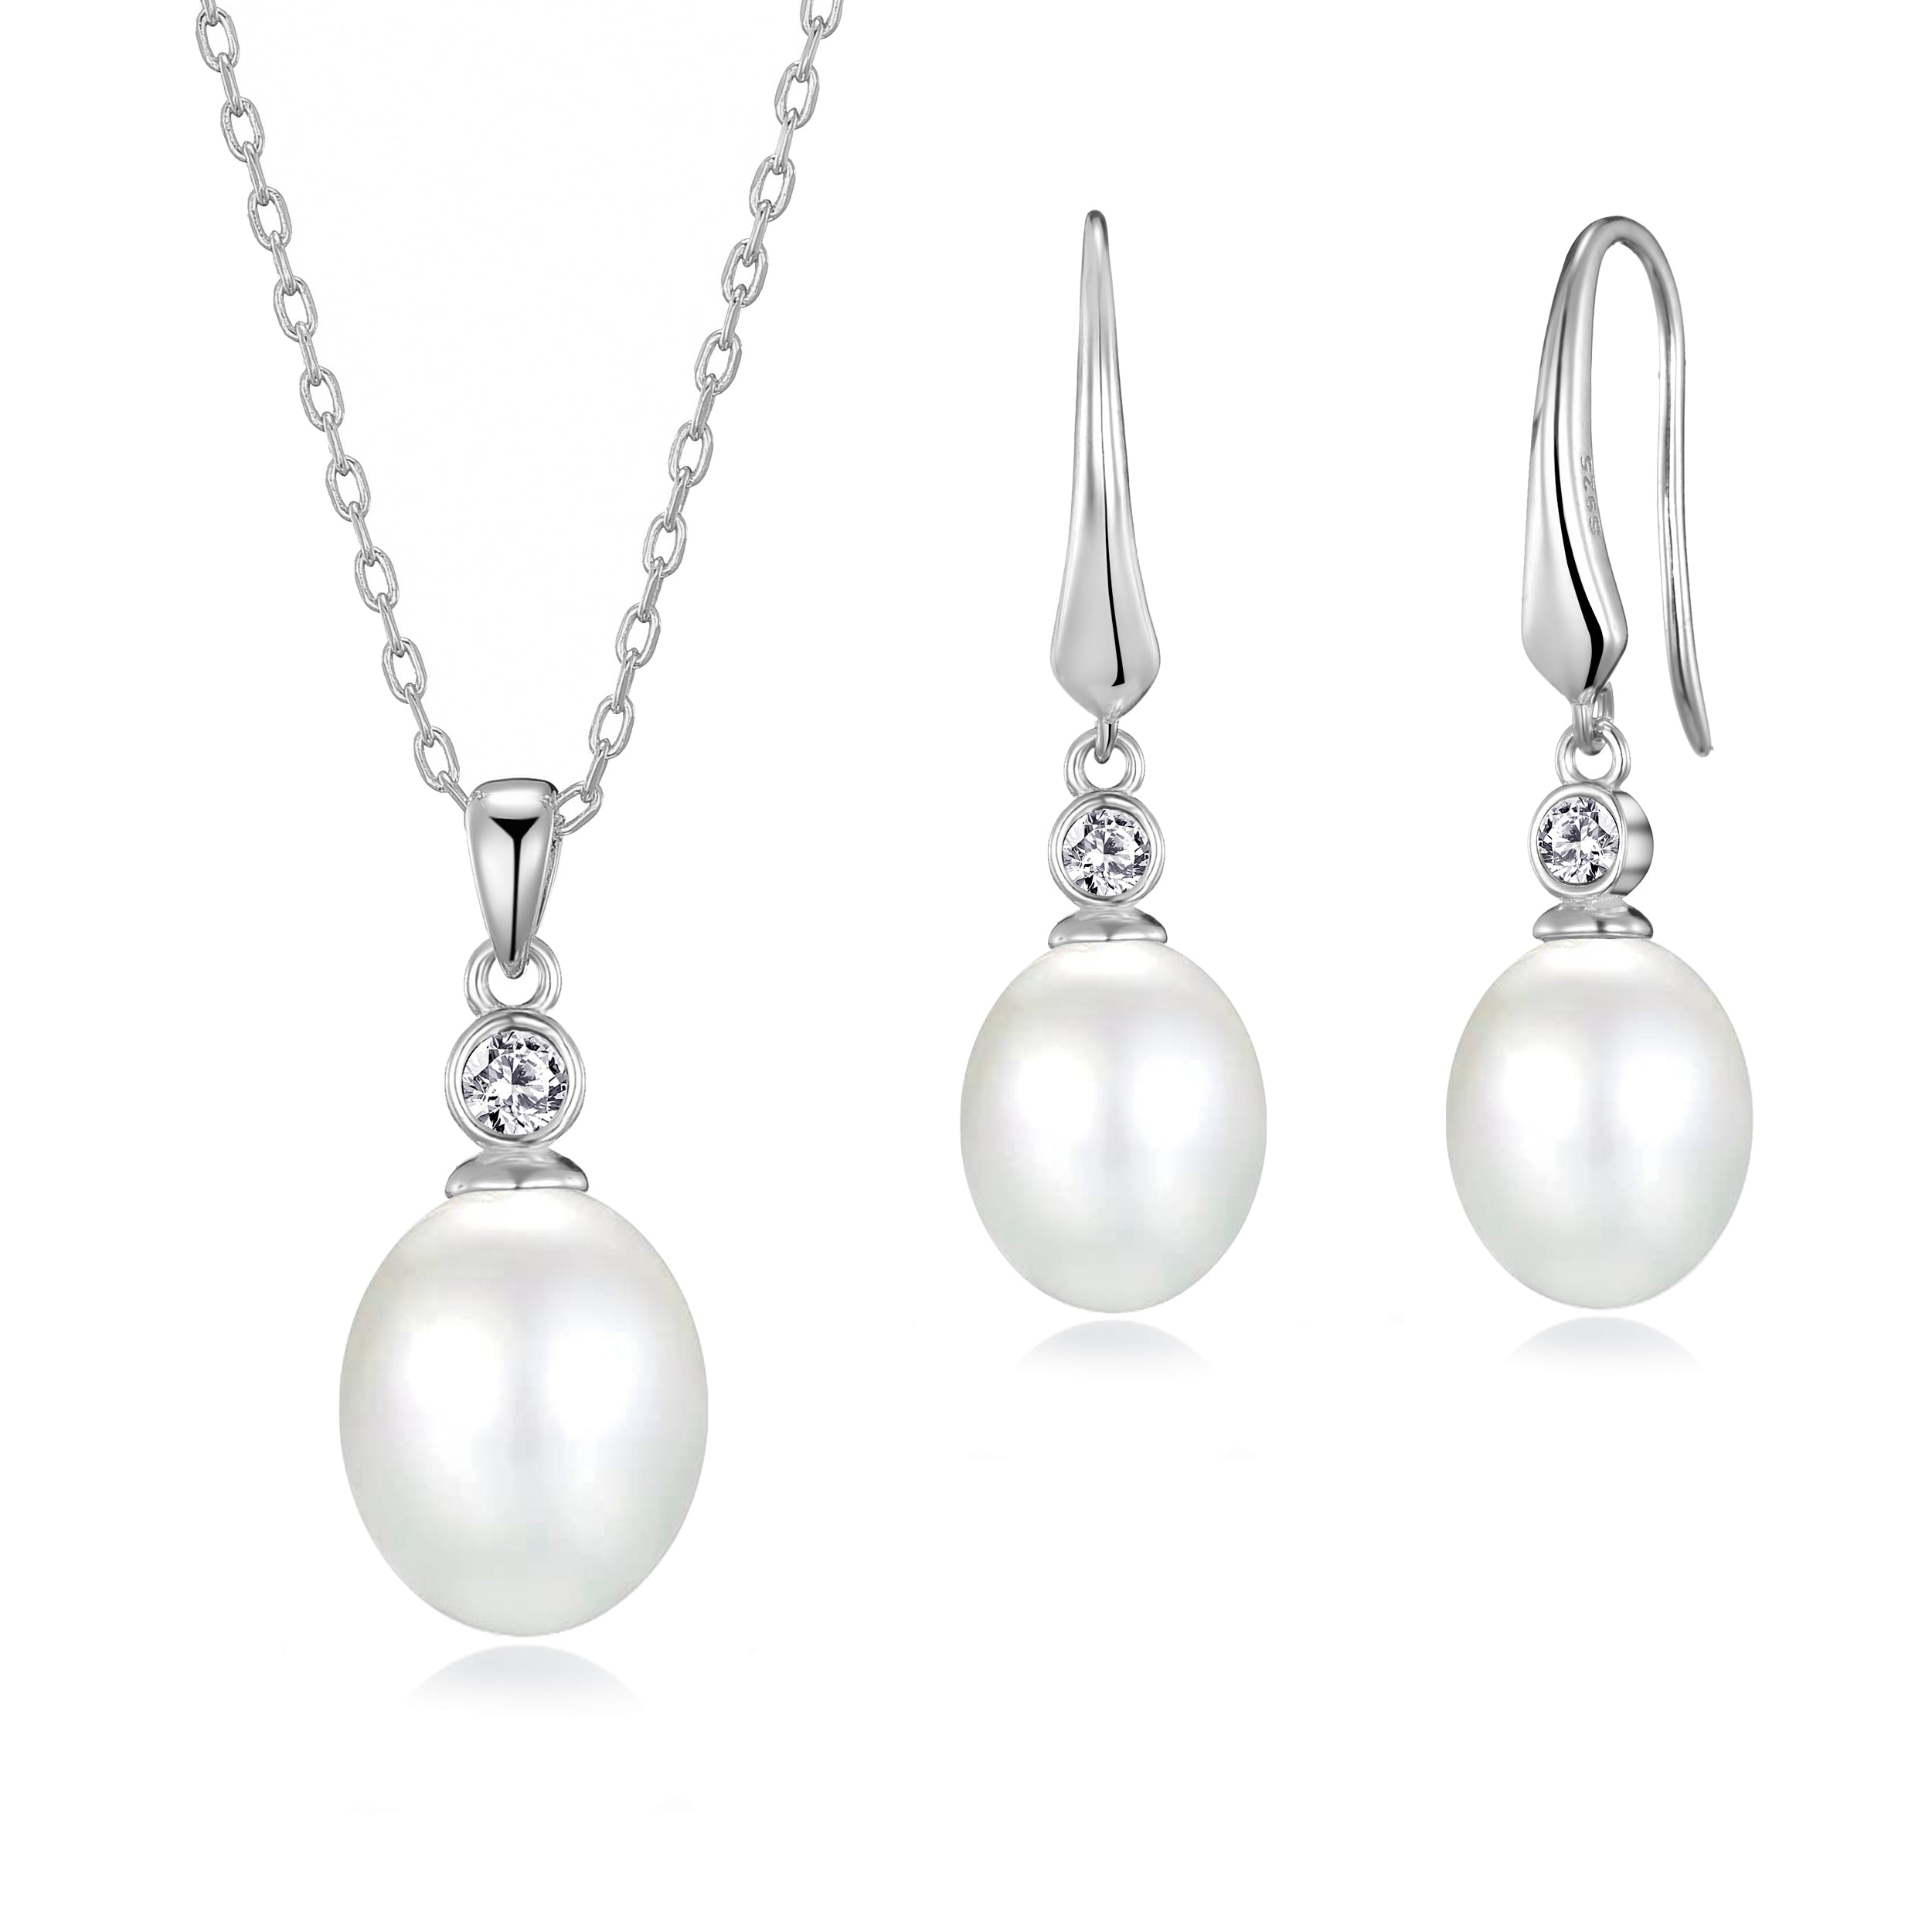 Sterling Silver White Pearl Drop Set Created with Zircondia® Crystals by Philip Jones Jewellery